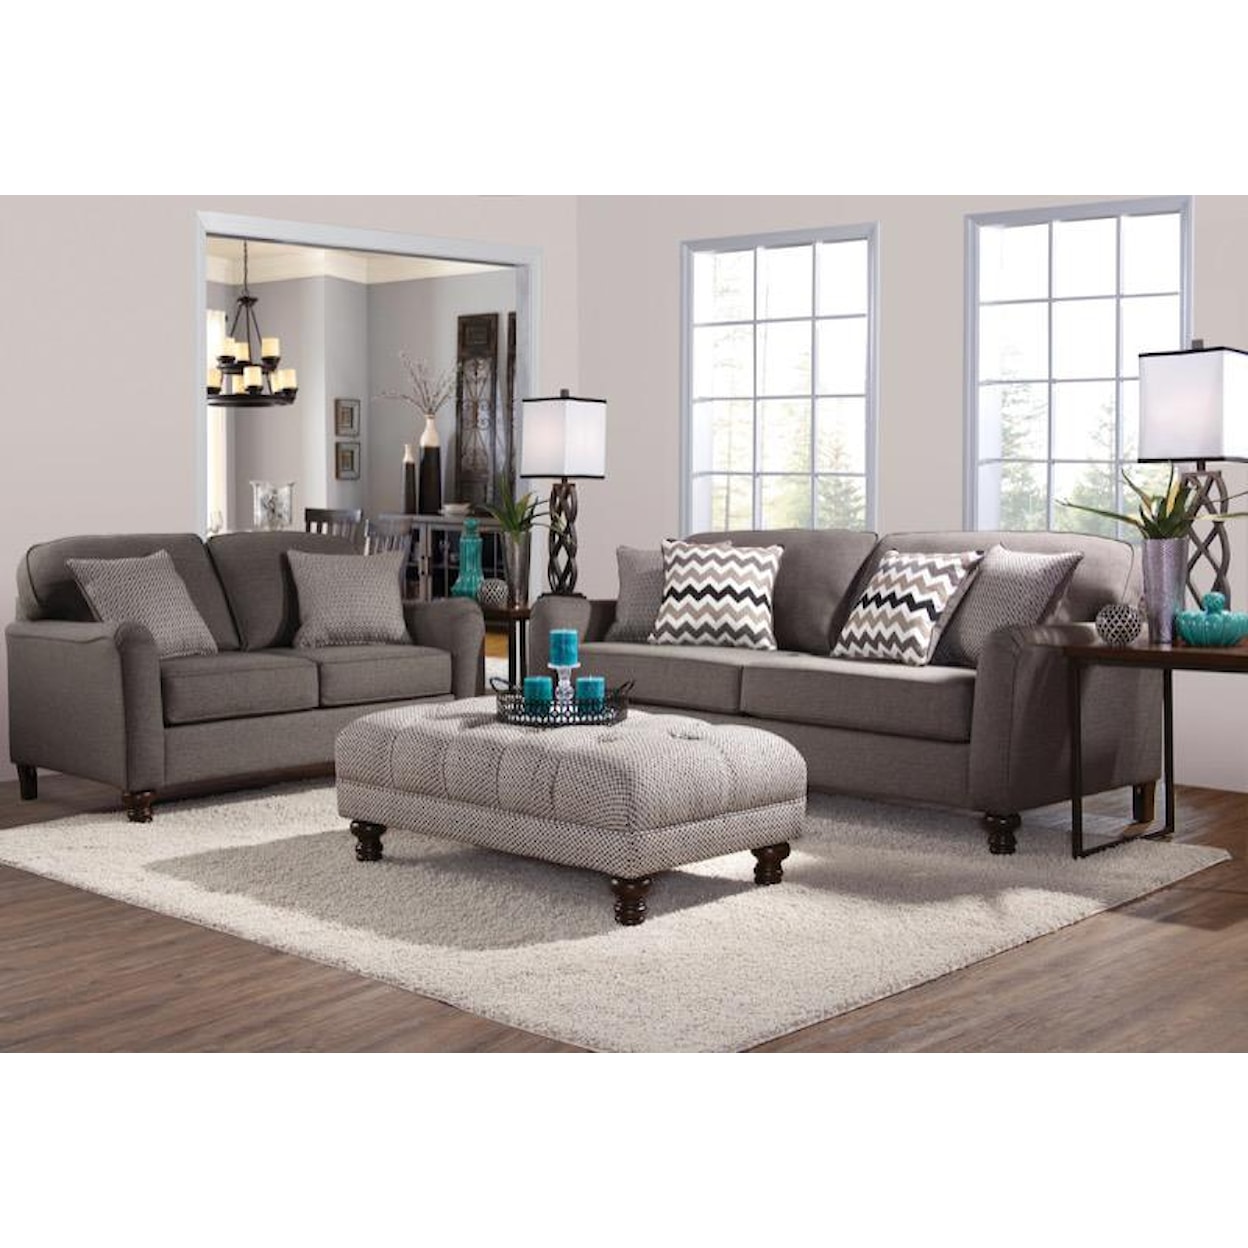 Serta Upholstery by Hughes Furniture 4050 Transitional Sofa